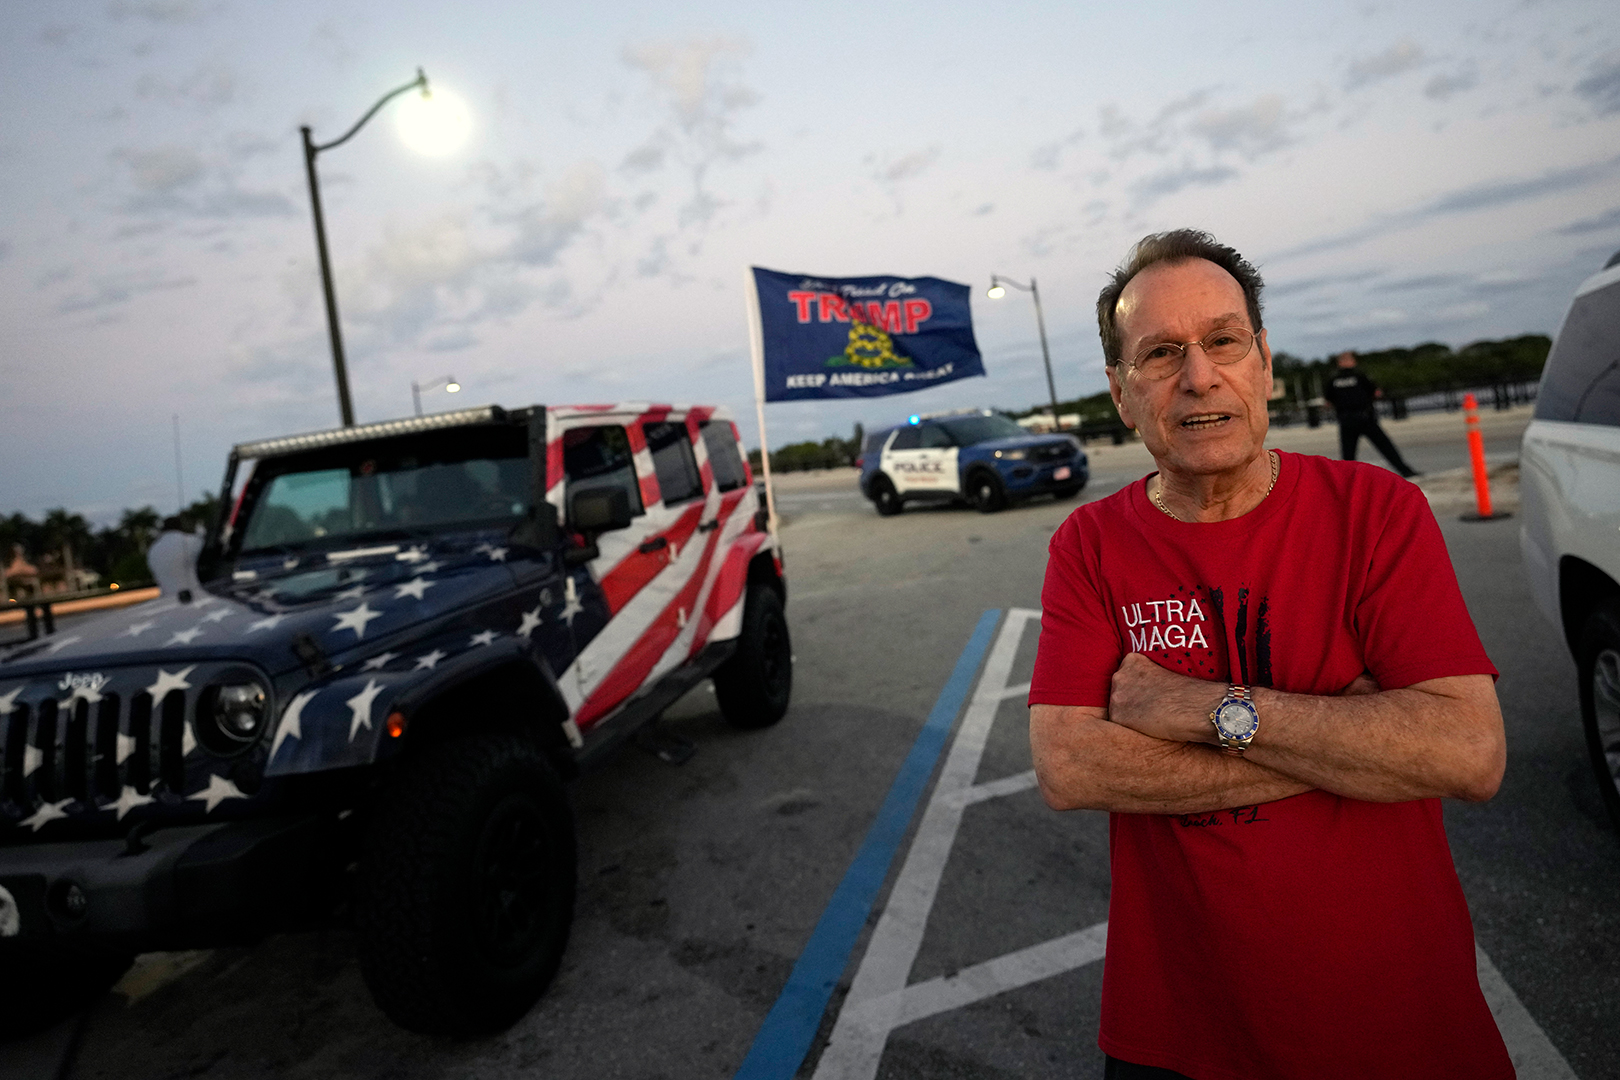 Amnon Shaleb of Boca Raton stands near his Jeep, decorated in the pattern of the American Flag, as he turns out to show support for former President Donald Trump.